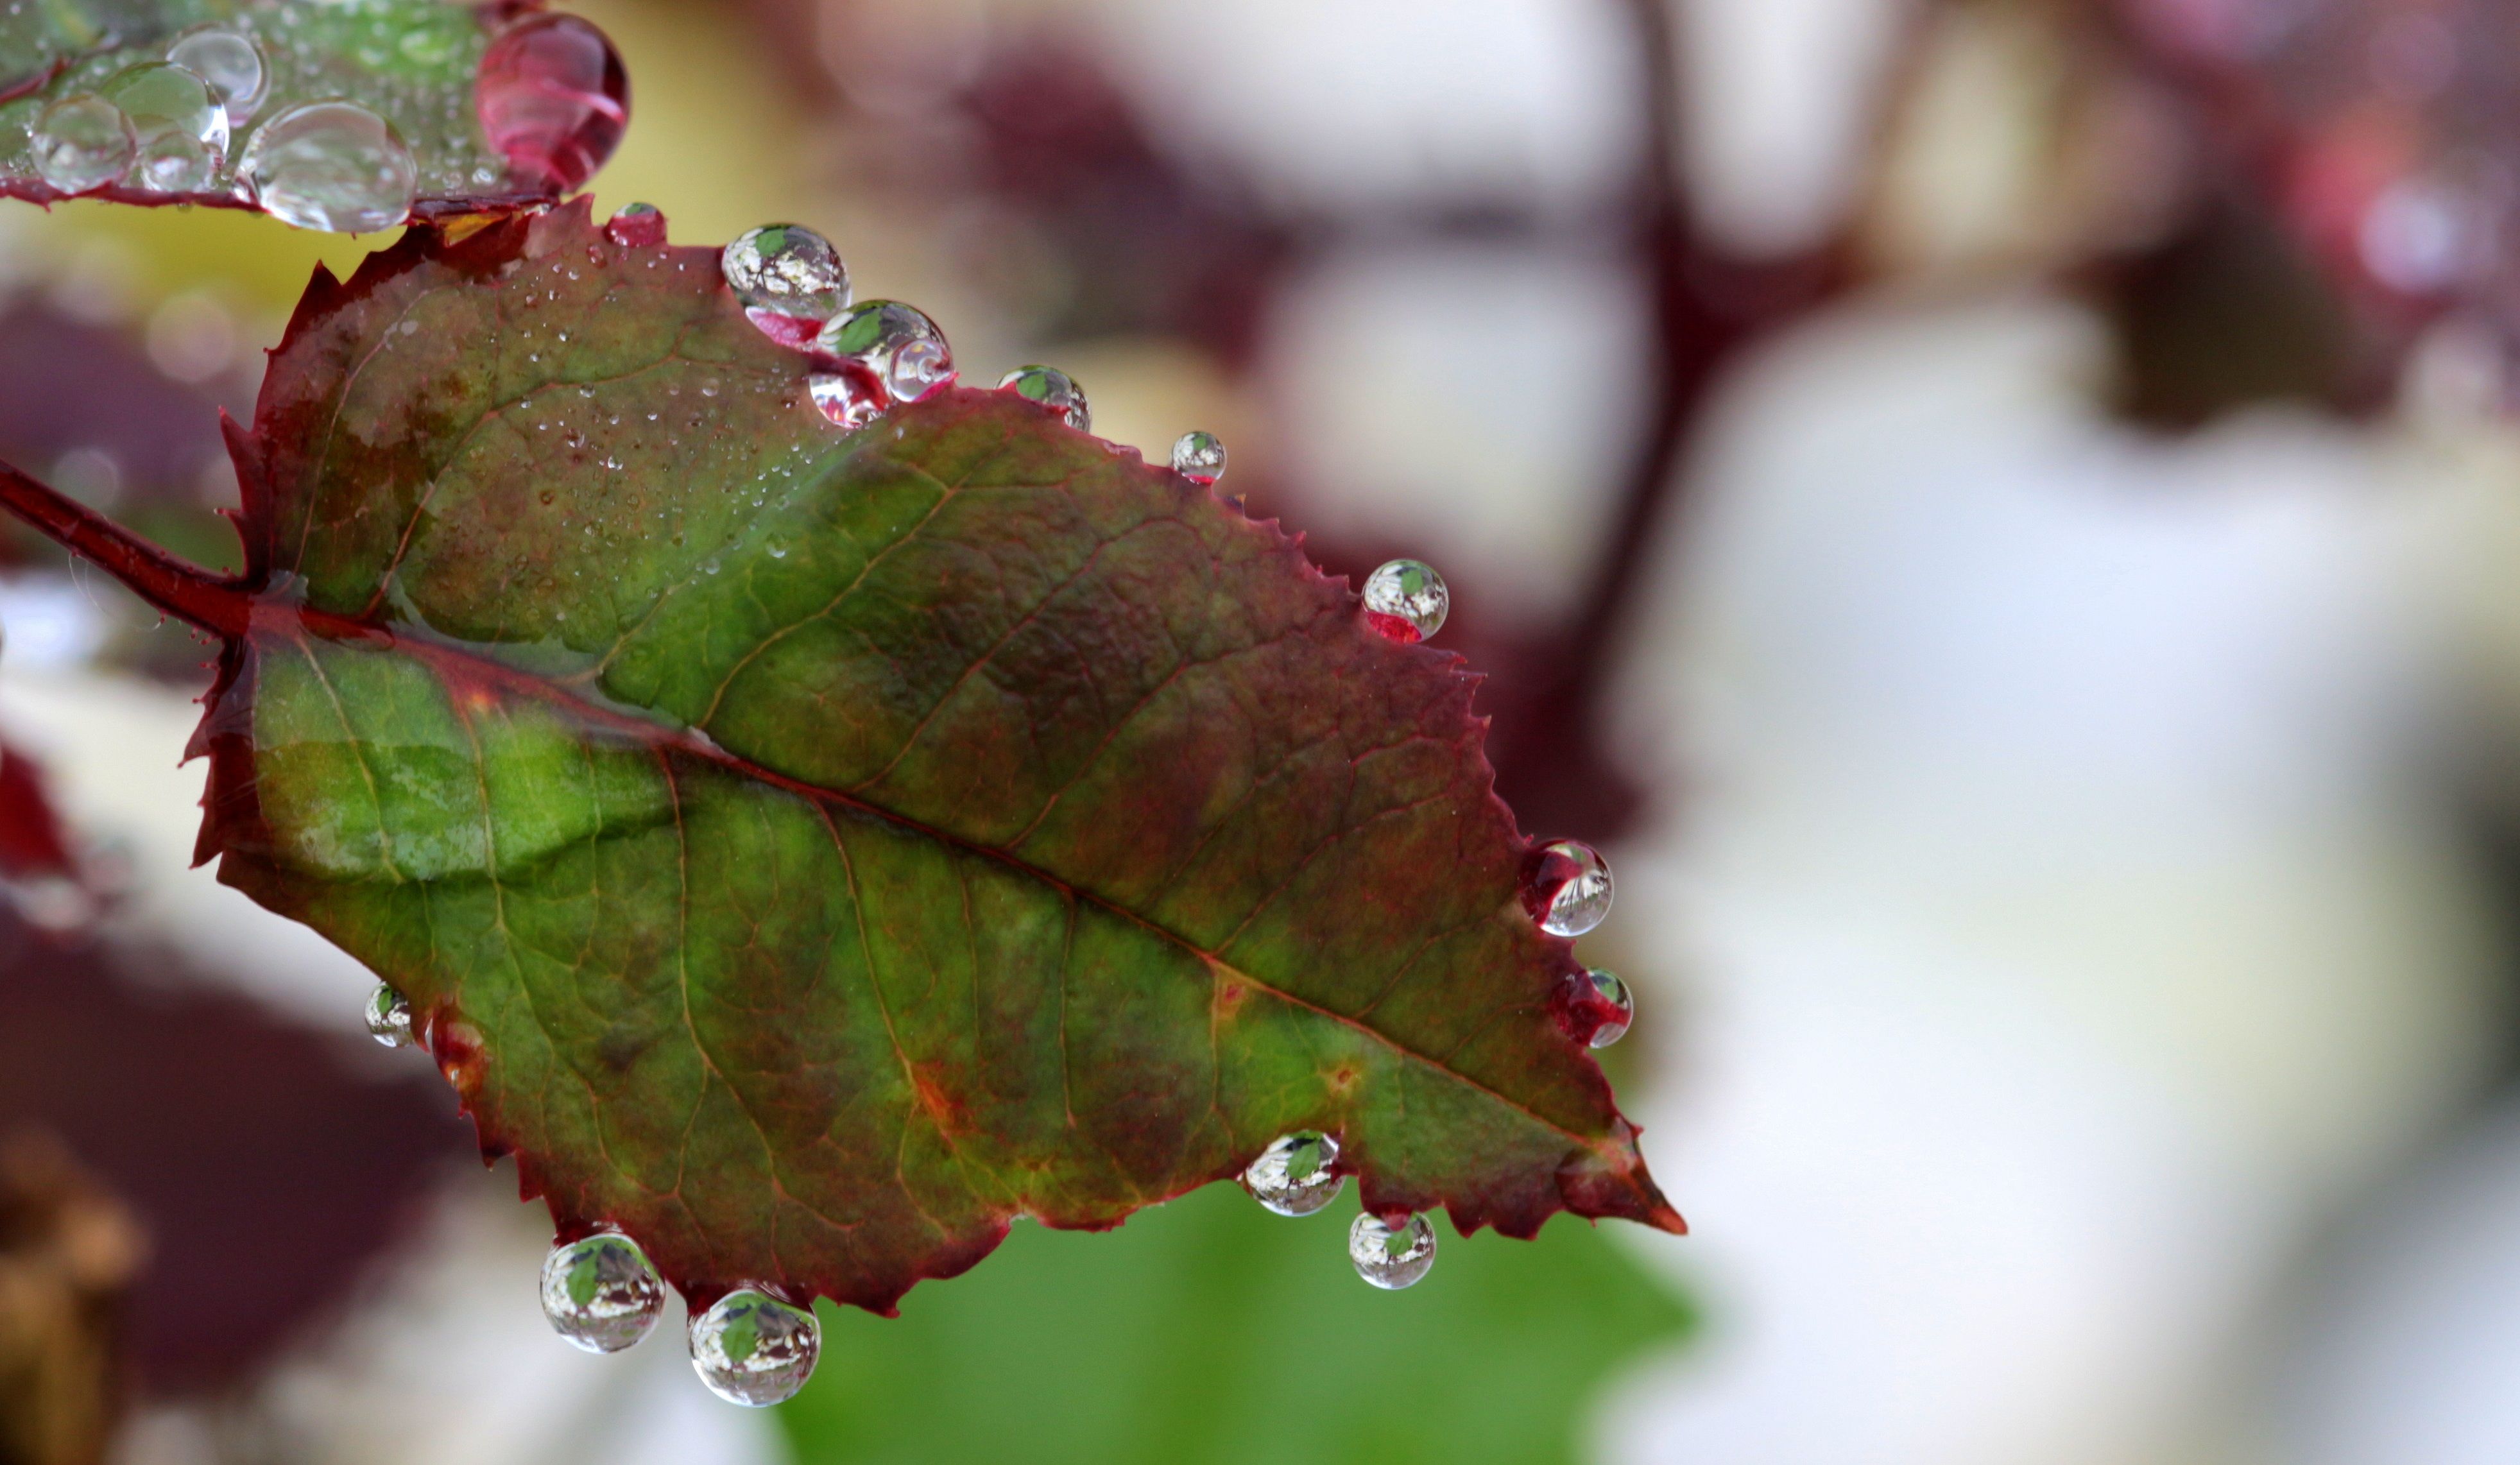 Dew on the leave photo